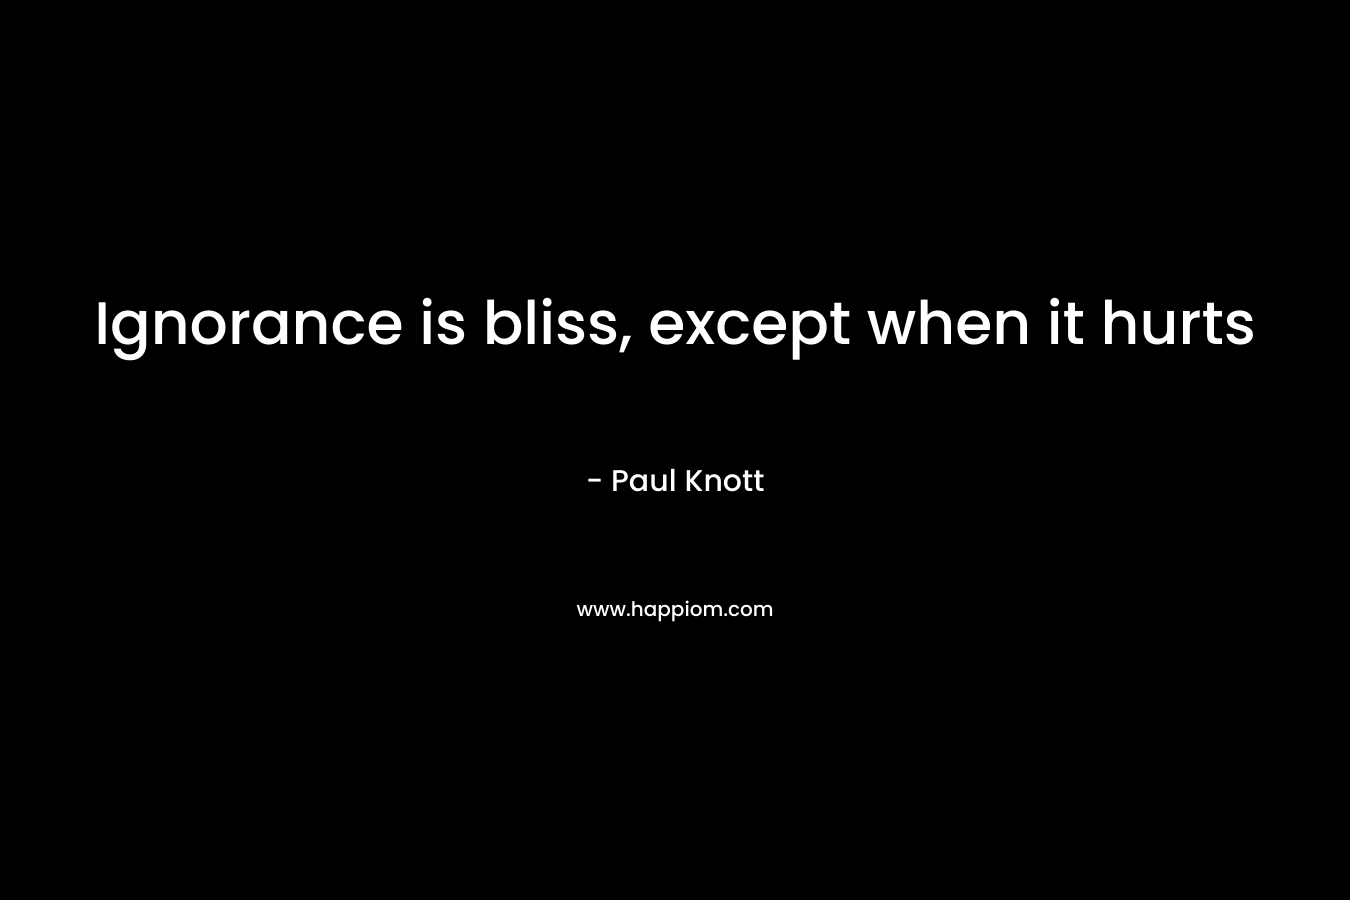 Ignorance is bliss, except when it hurts